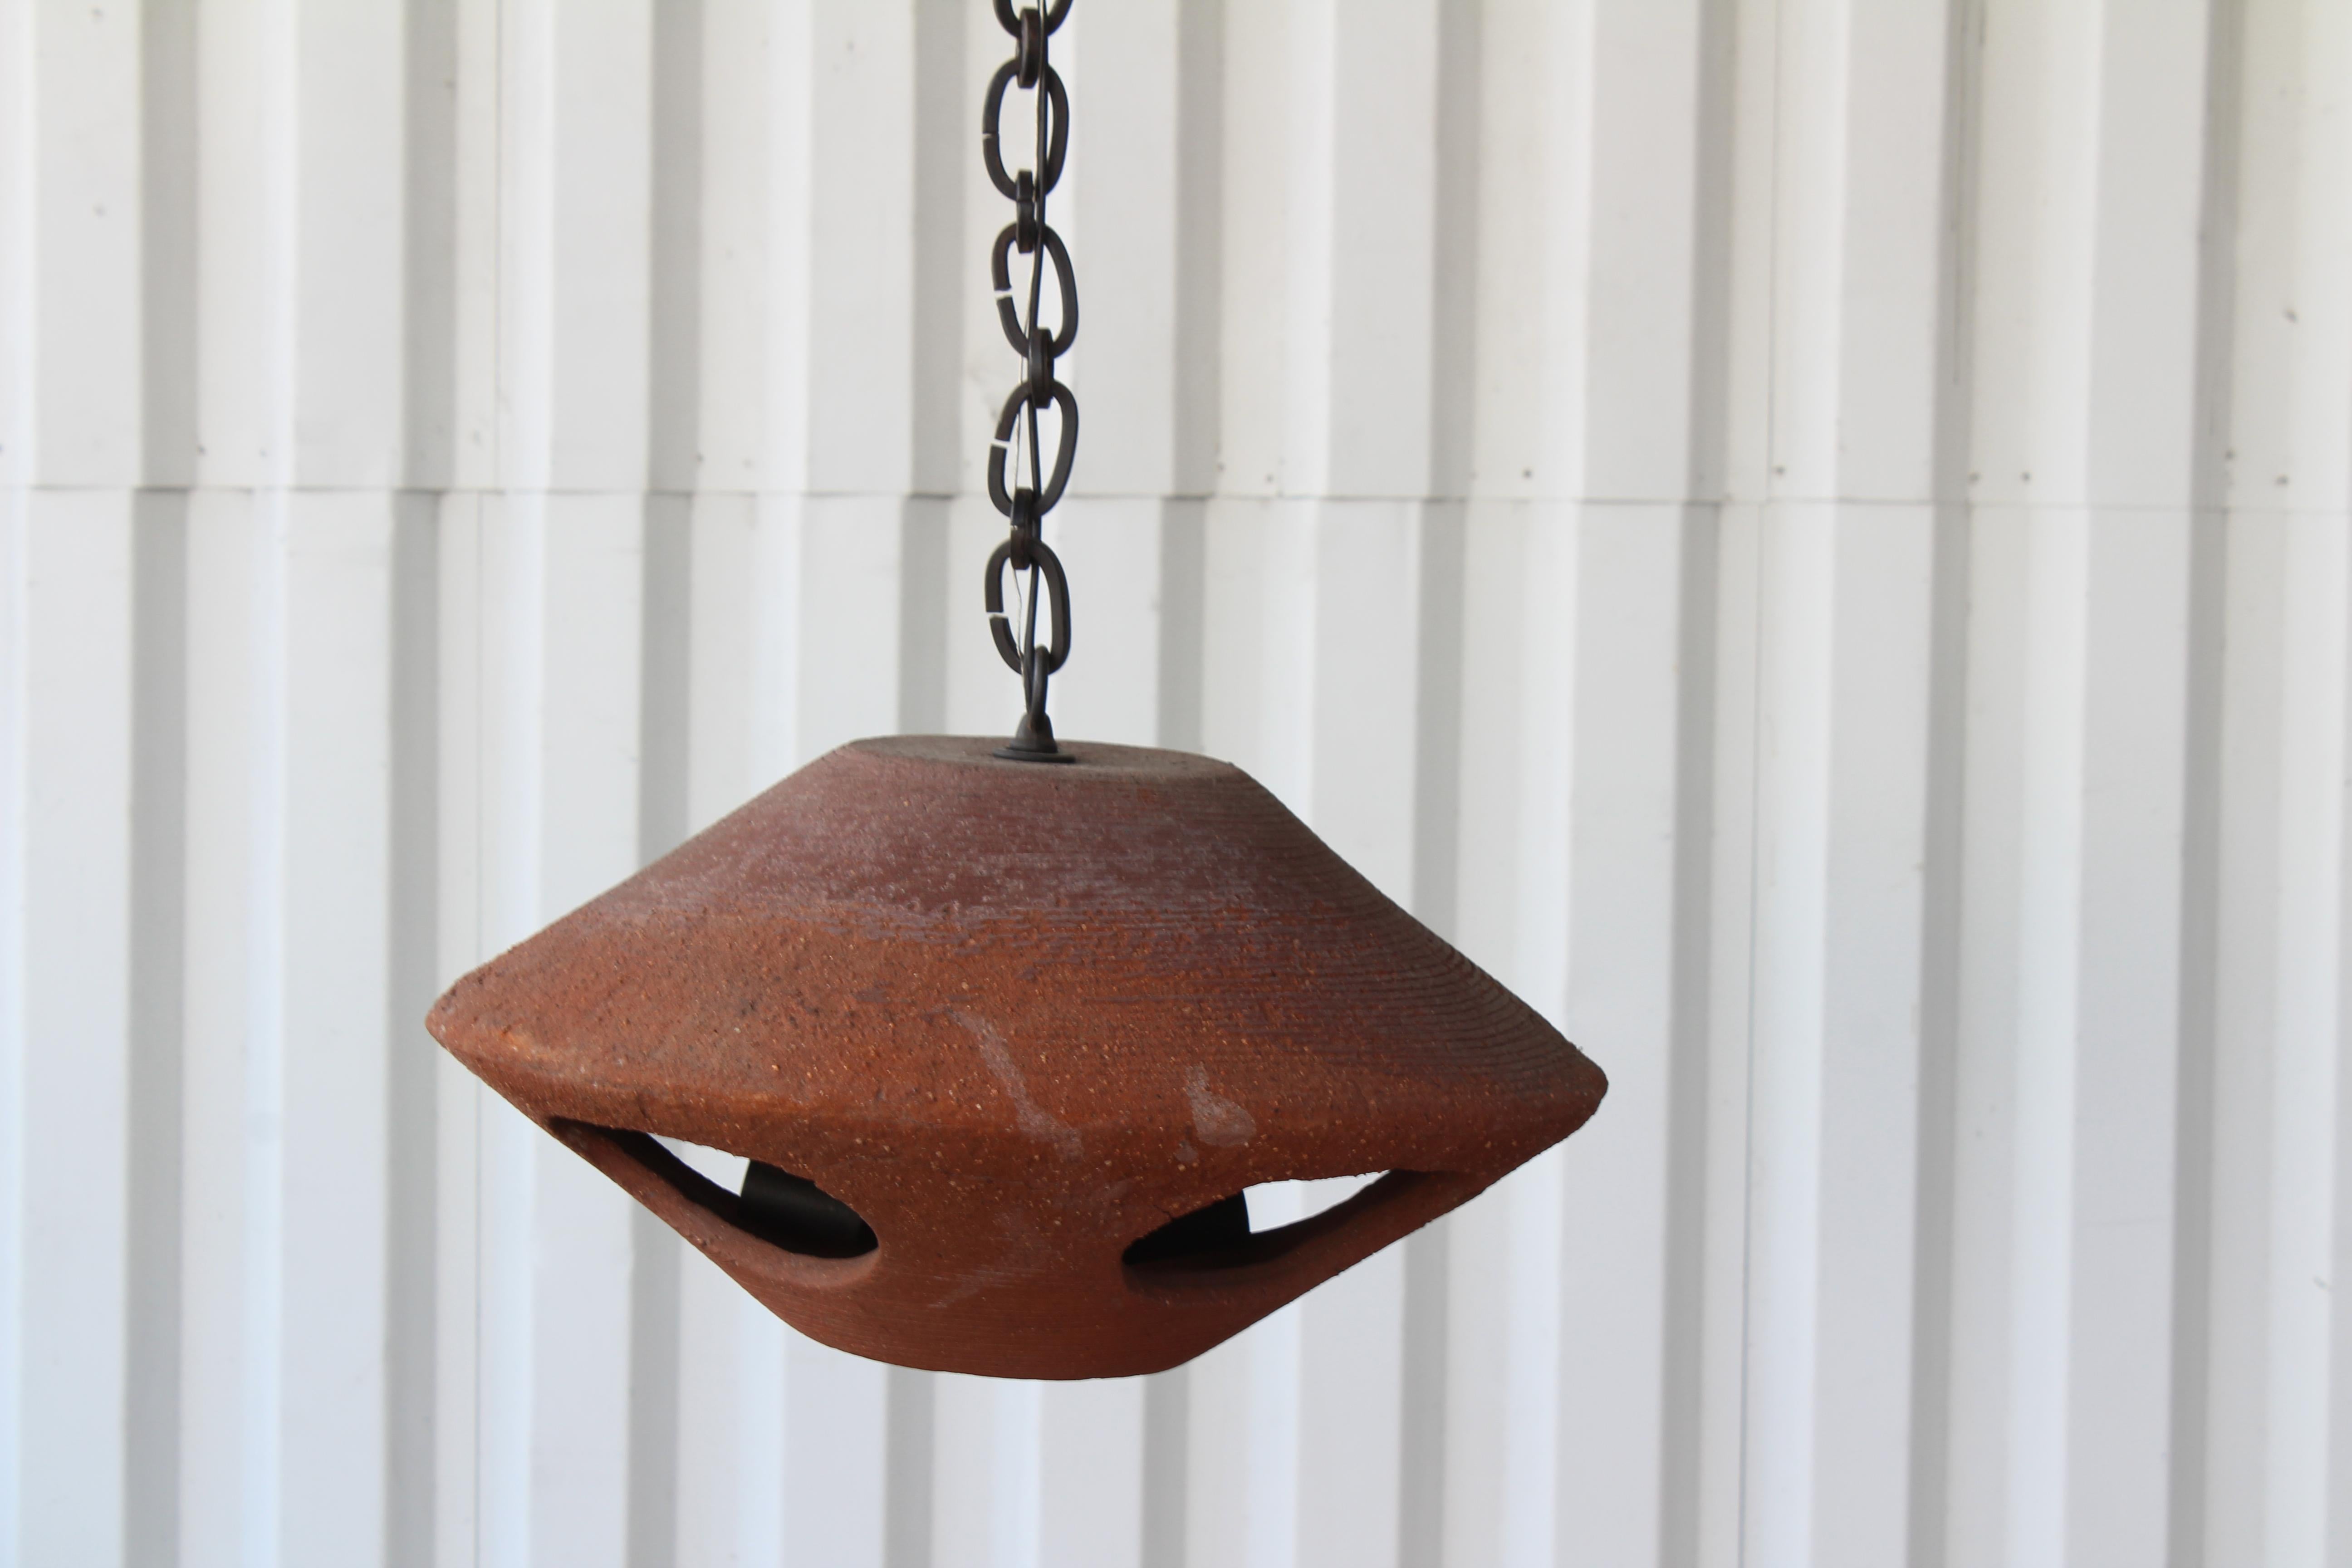 Vintage terra-cotta pendant light, California, 1960s. Custom rewired and fitted with an iron chain. Total length from canopy to the bottom of the pendant is 59